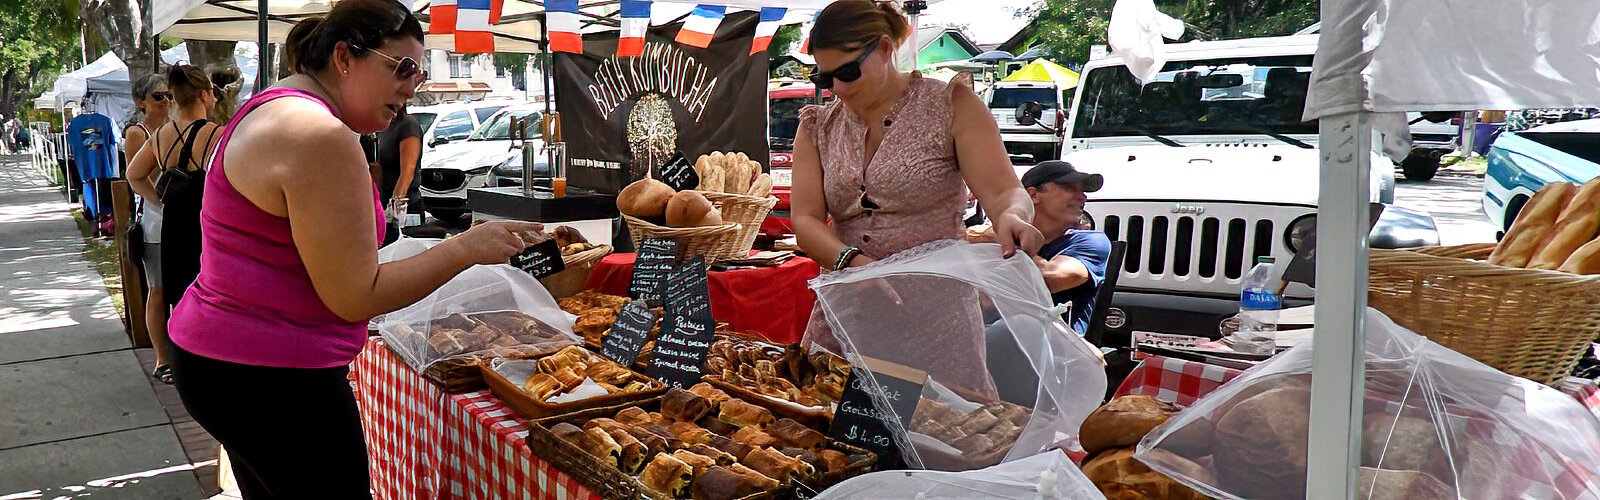 French croissants and bakery items made by Philippe and Angelique of Le Petit Delice   are available for purchase during the weekly Gulfport Tuesday Fresh Market.